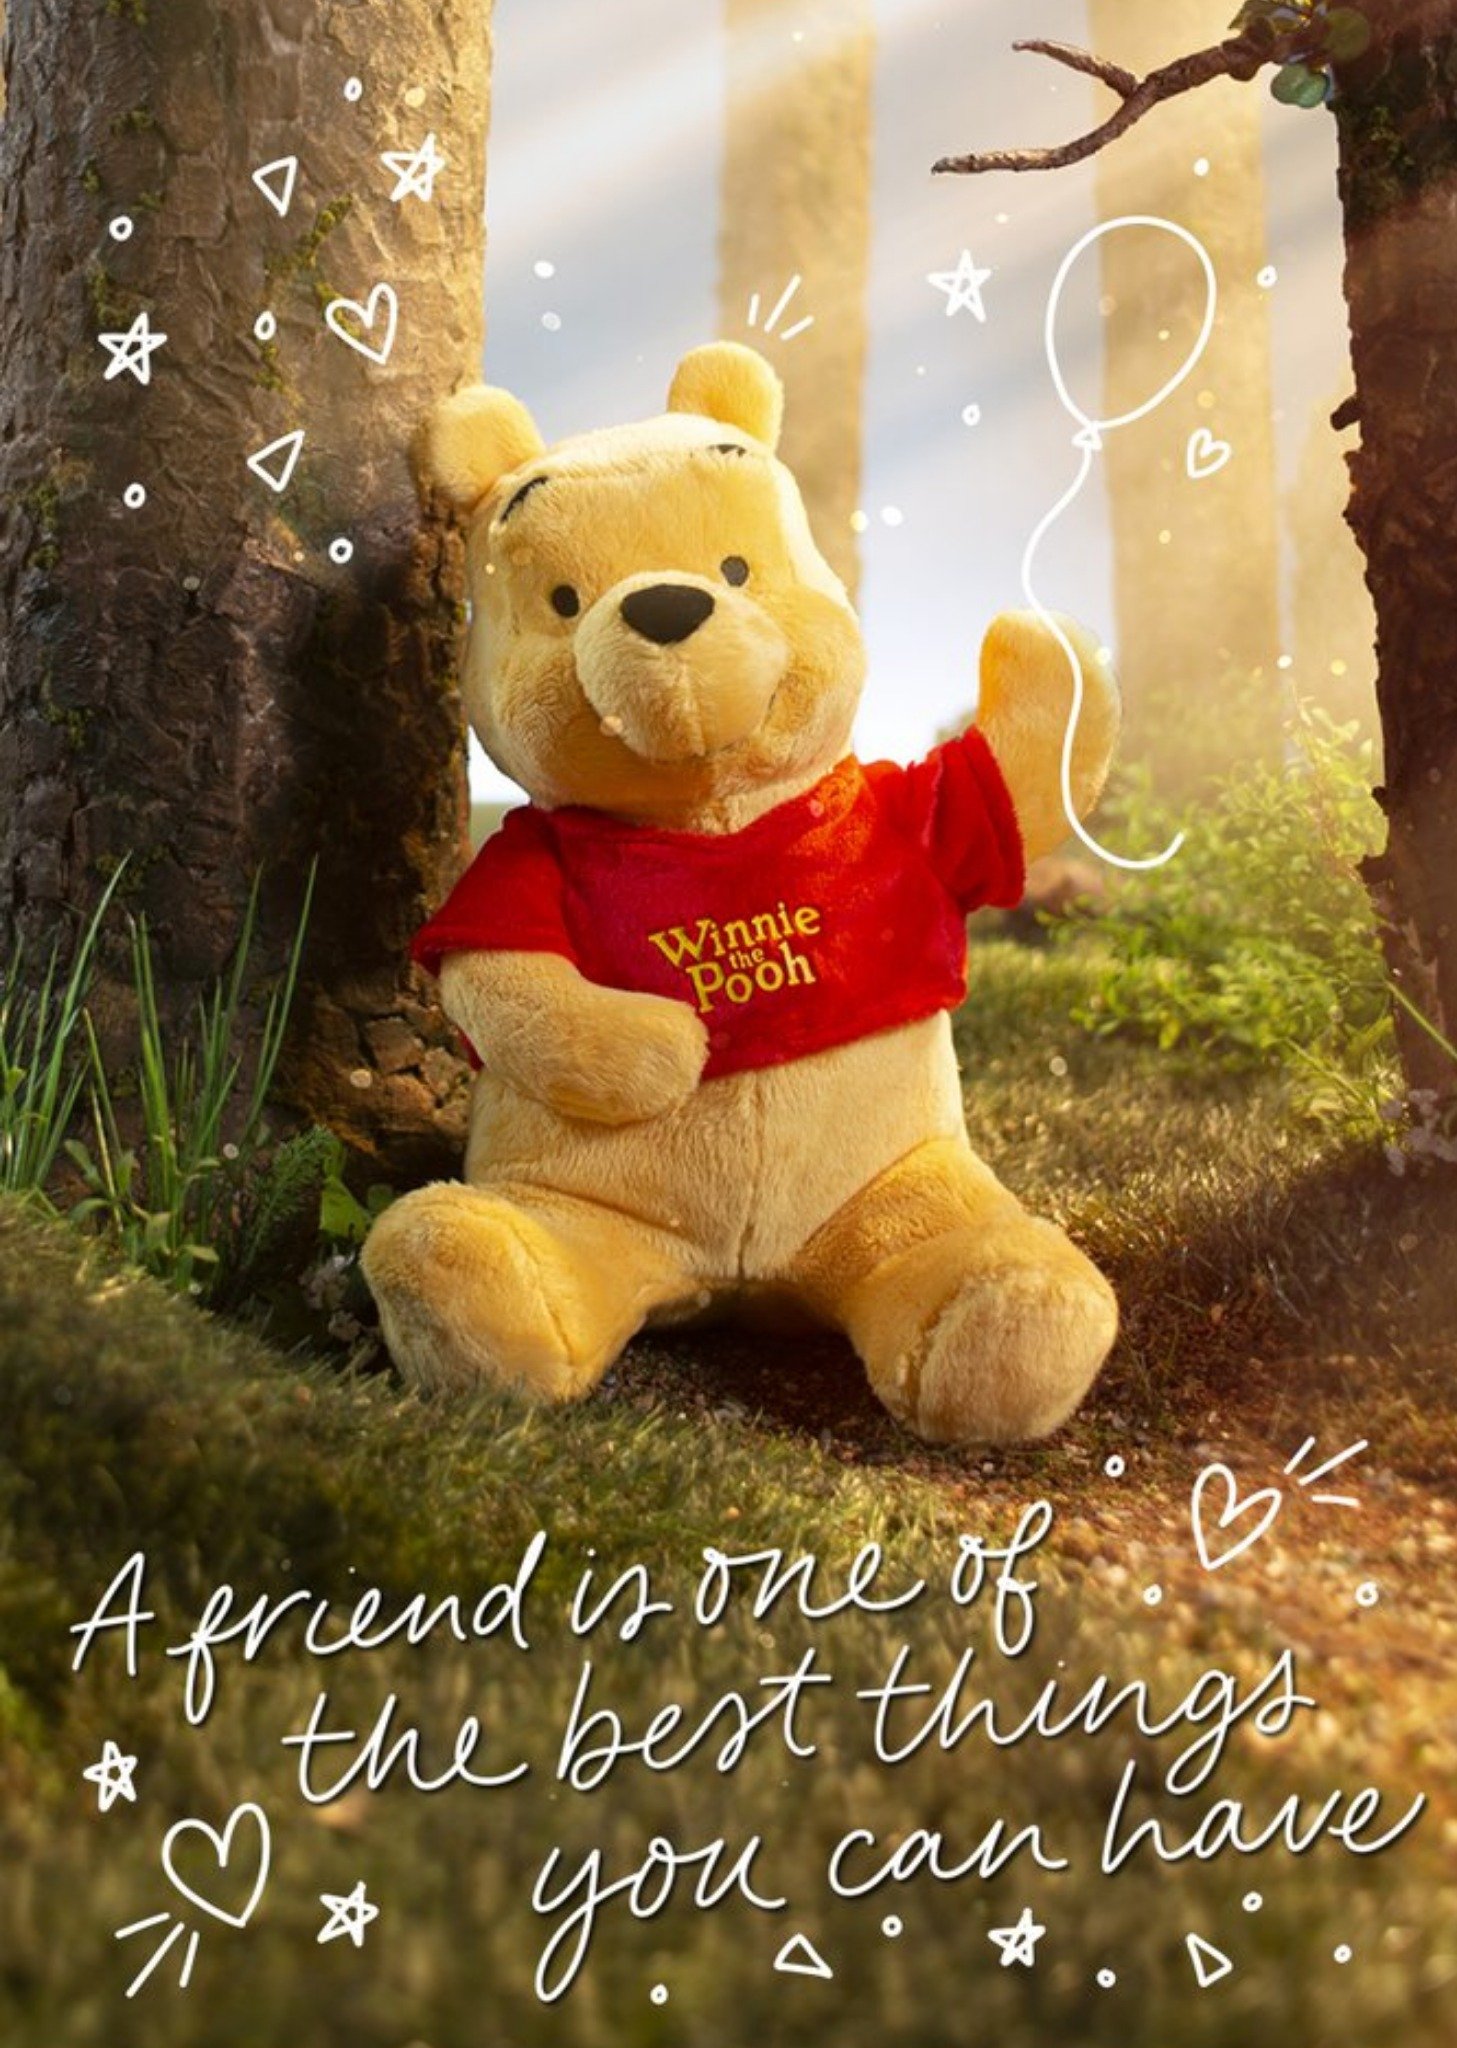 Winnie The Pooh Cute Disney Plush Winne The Pooh Best Thing You Can Have Card, Large